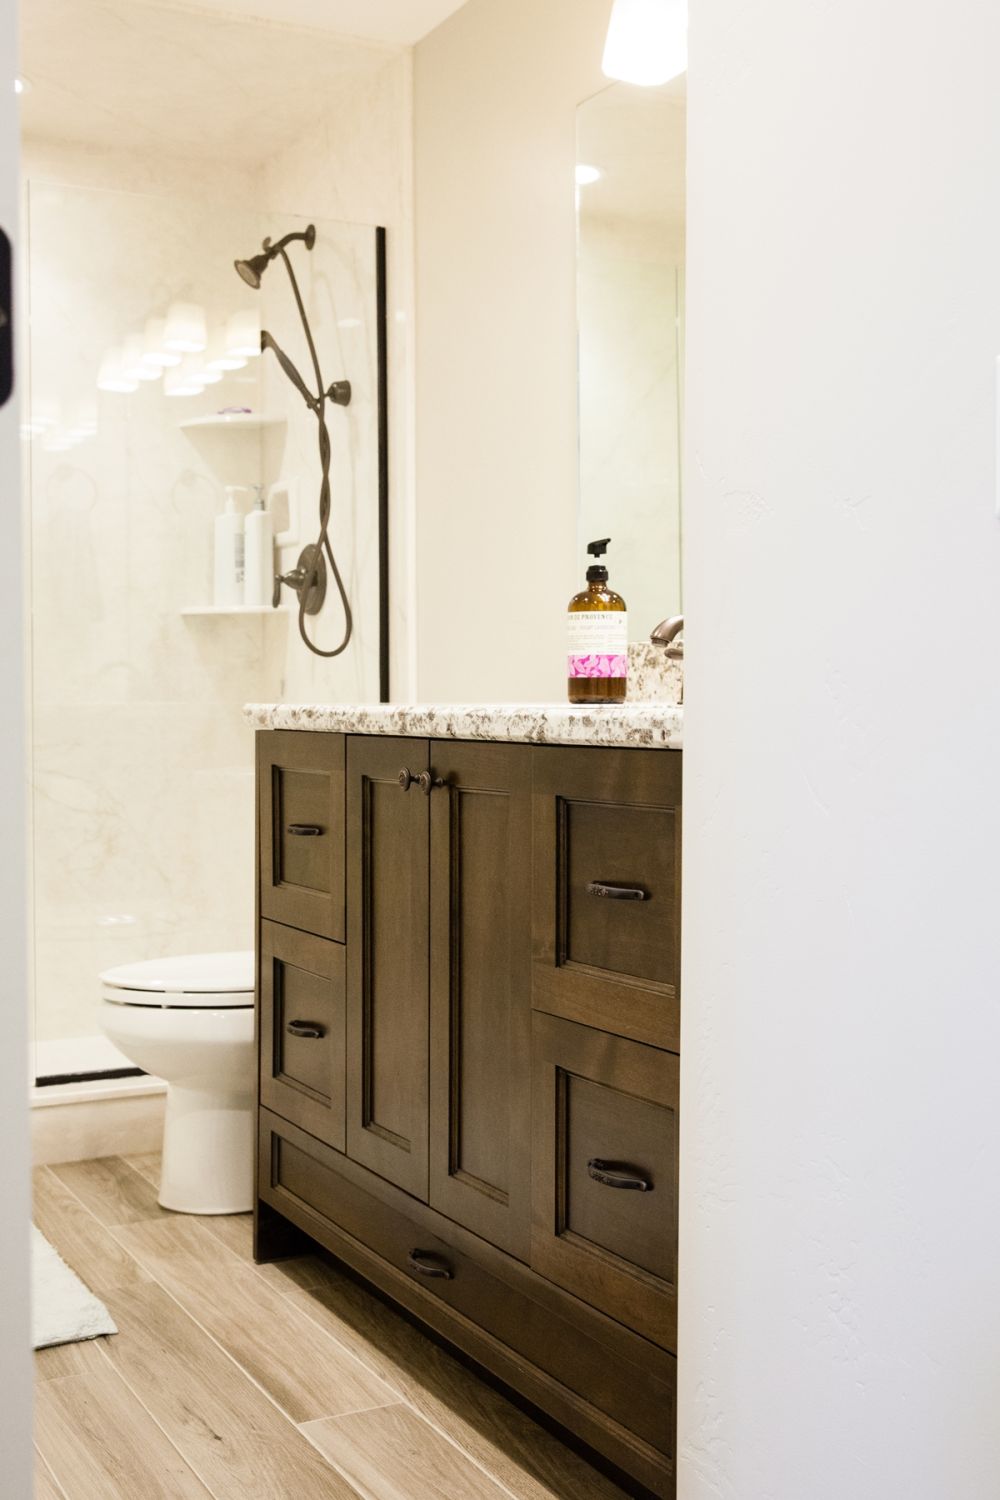 How to Decorate a Bathroom Without Clutter Tips